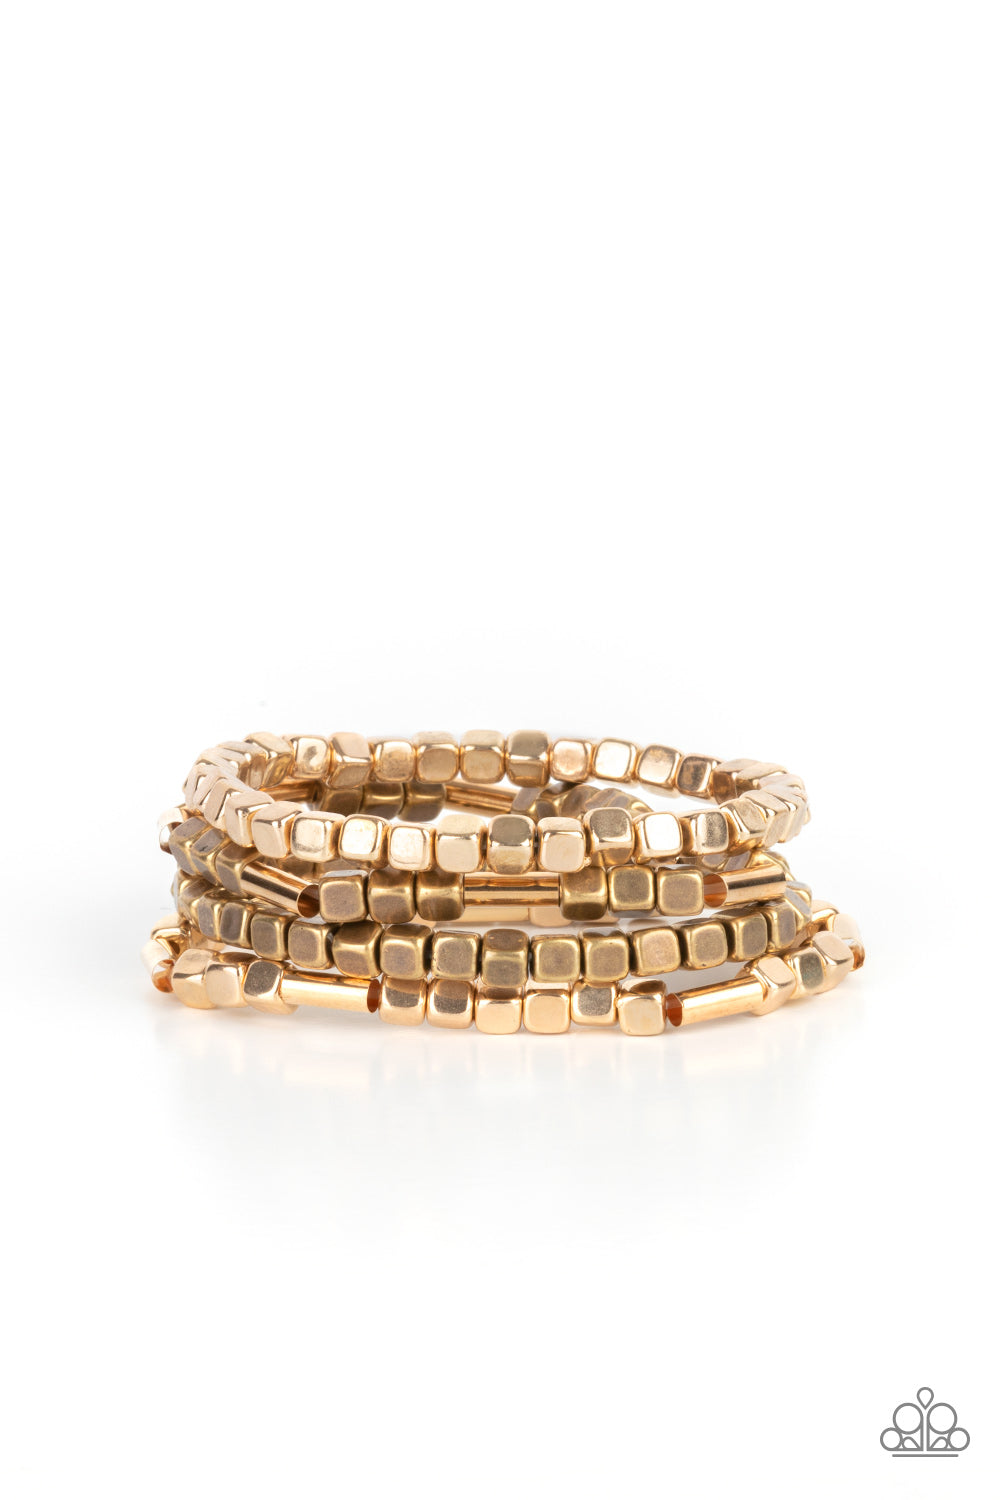 Metro Materials Multi Bracelet - Paparazzi Accessories  Lightweight and flirty, two strands of gold and brass square beads interspersed with gold cylinders, are paired with two strands of gold and brass cubes. The four stretchy bracelets come together to create an irresistible stack of metallic mayhem.  All Paparazzi Accessories are lead free and nickel free!  Sold as one set of four bracelets.